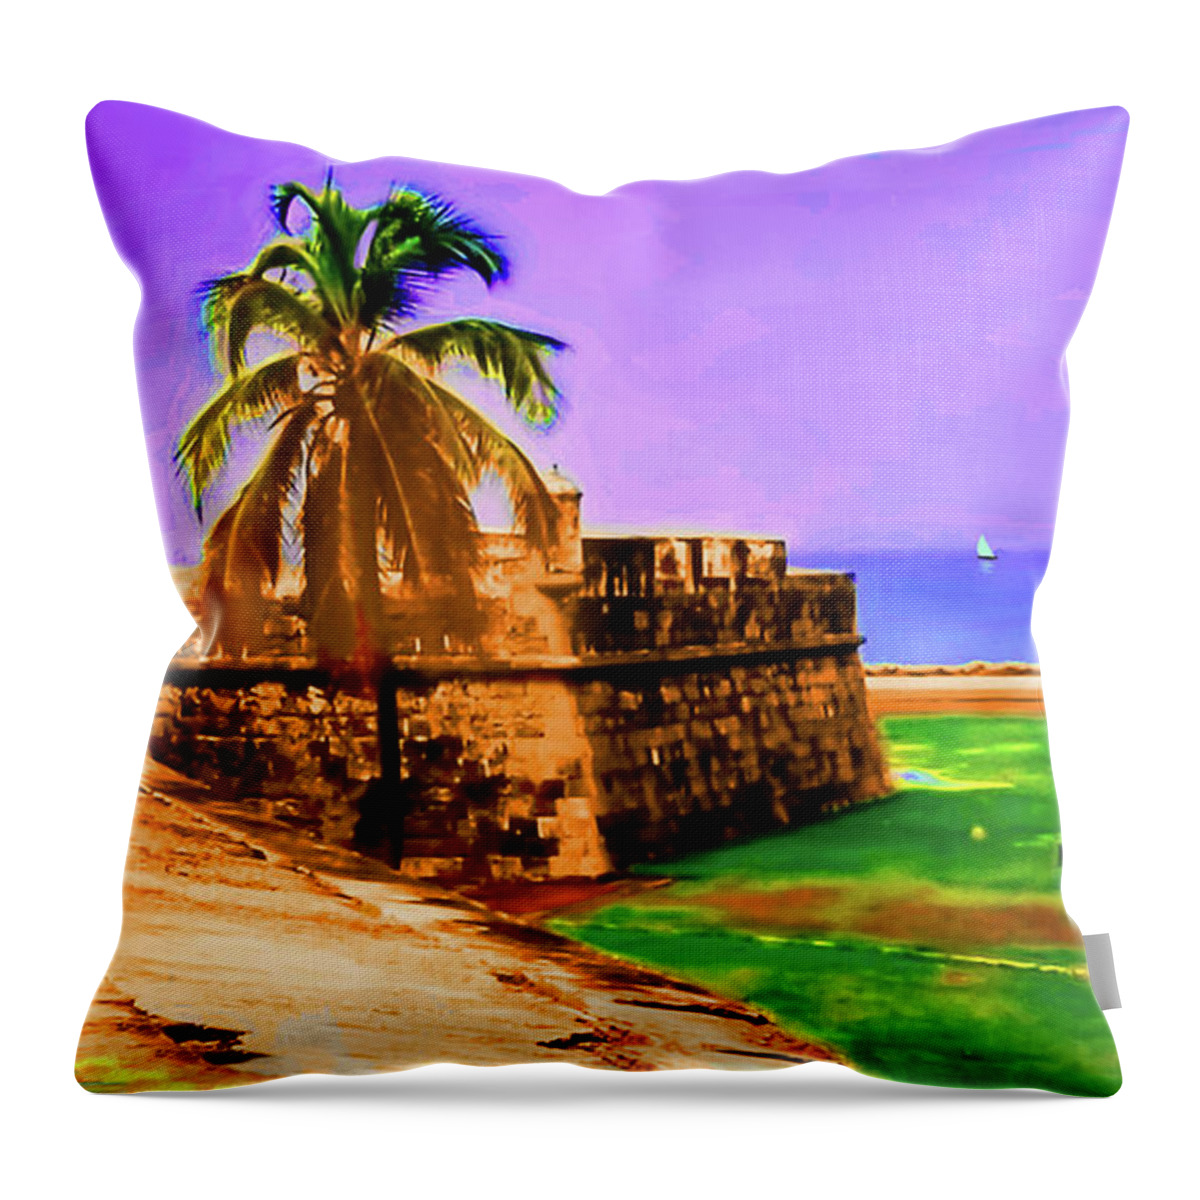 Caribbean Throw Pillow featuring the digital art Island Fort by CHAZ Daugherty